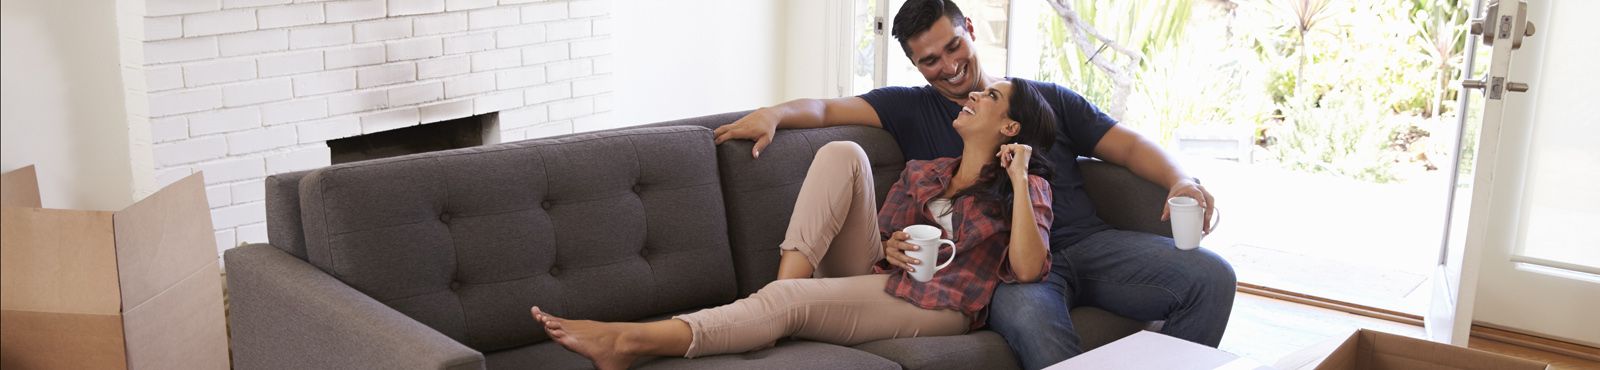 photo of couple relaxing on the couch at home